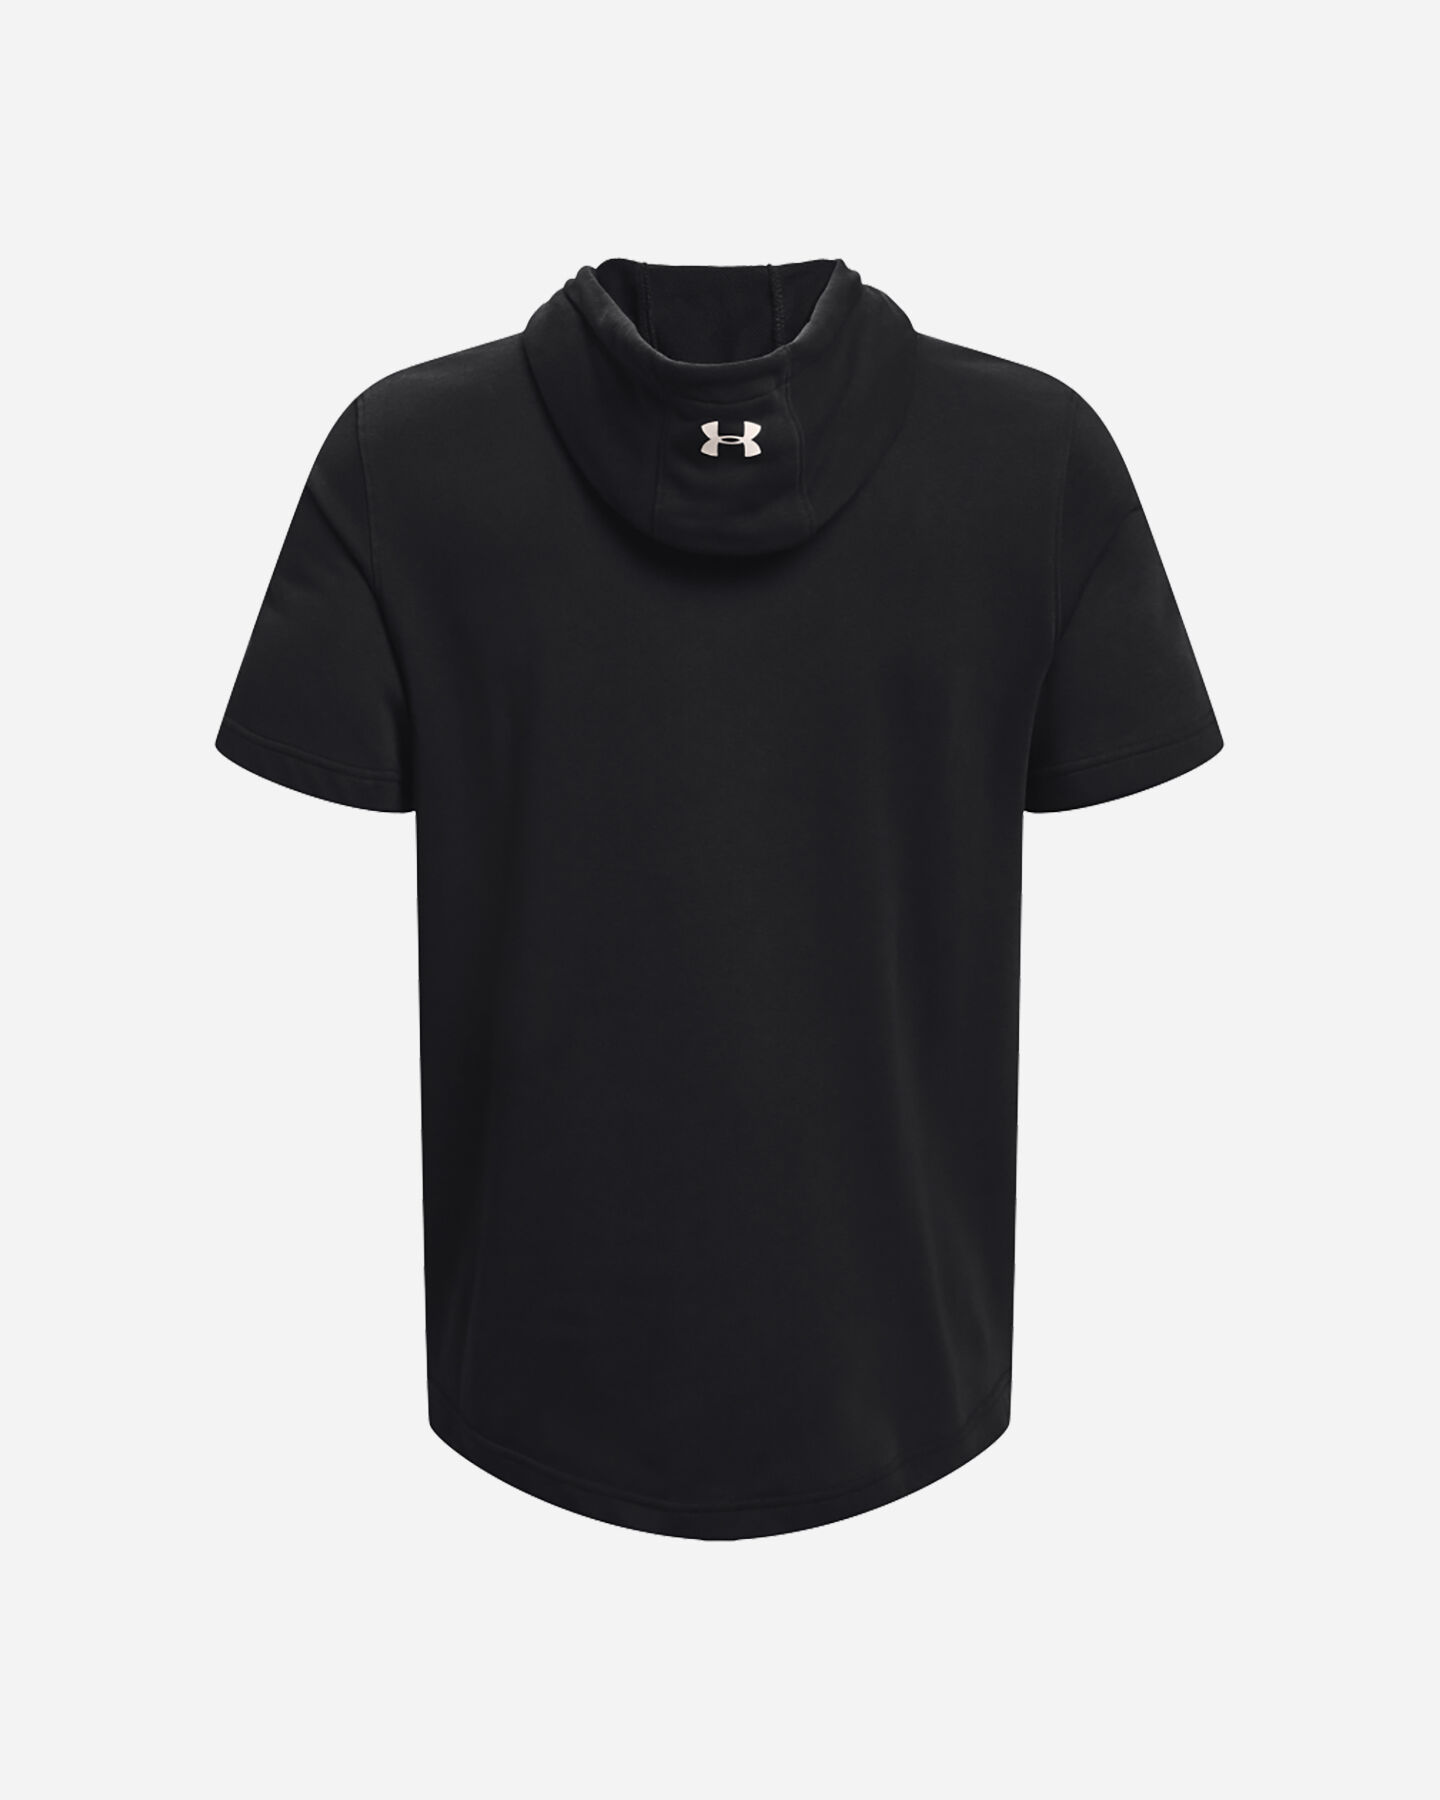  Felpa UNDER ARMOUR PROJECT ROCK M S5458856|0002|MD scatto 1